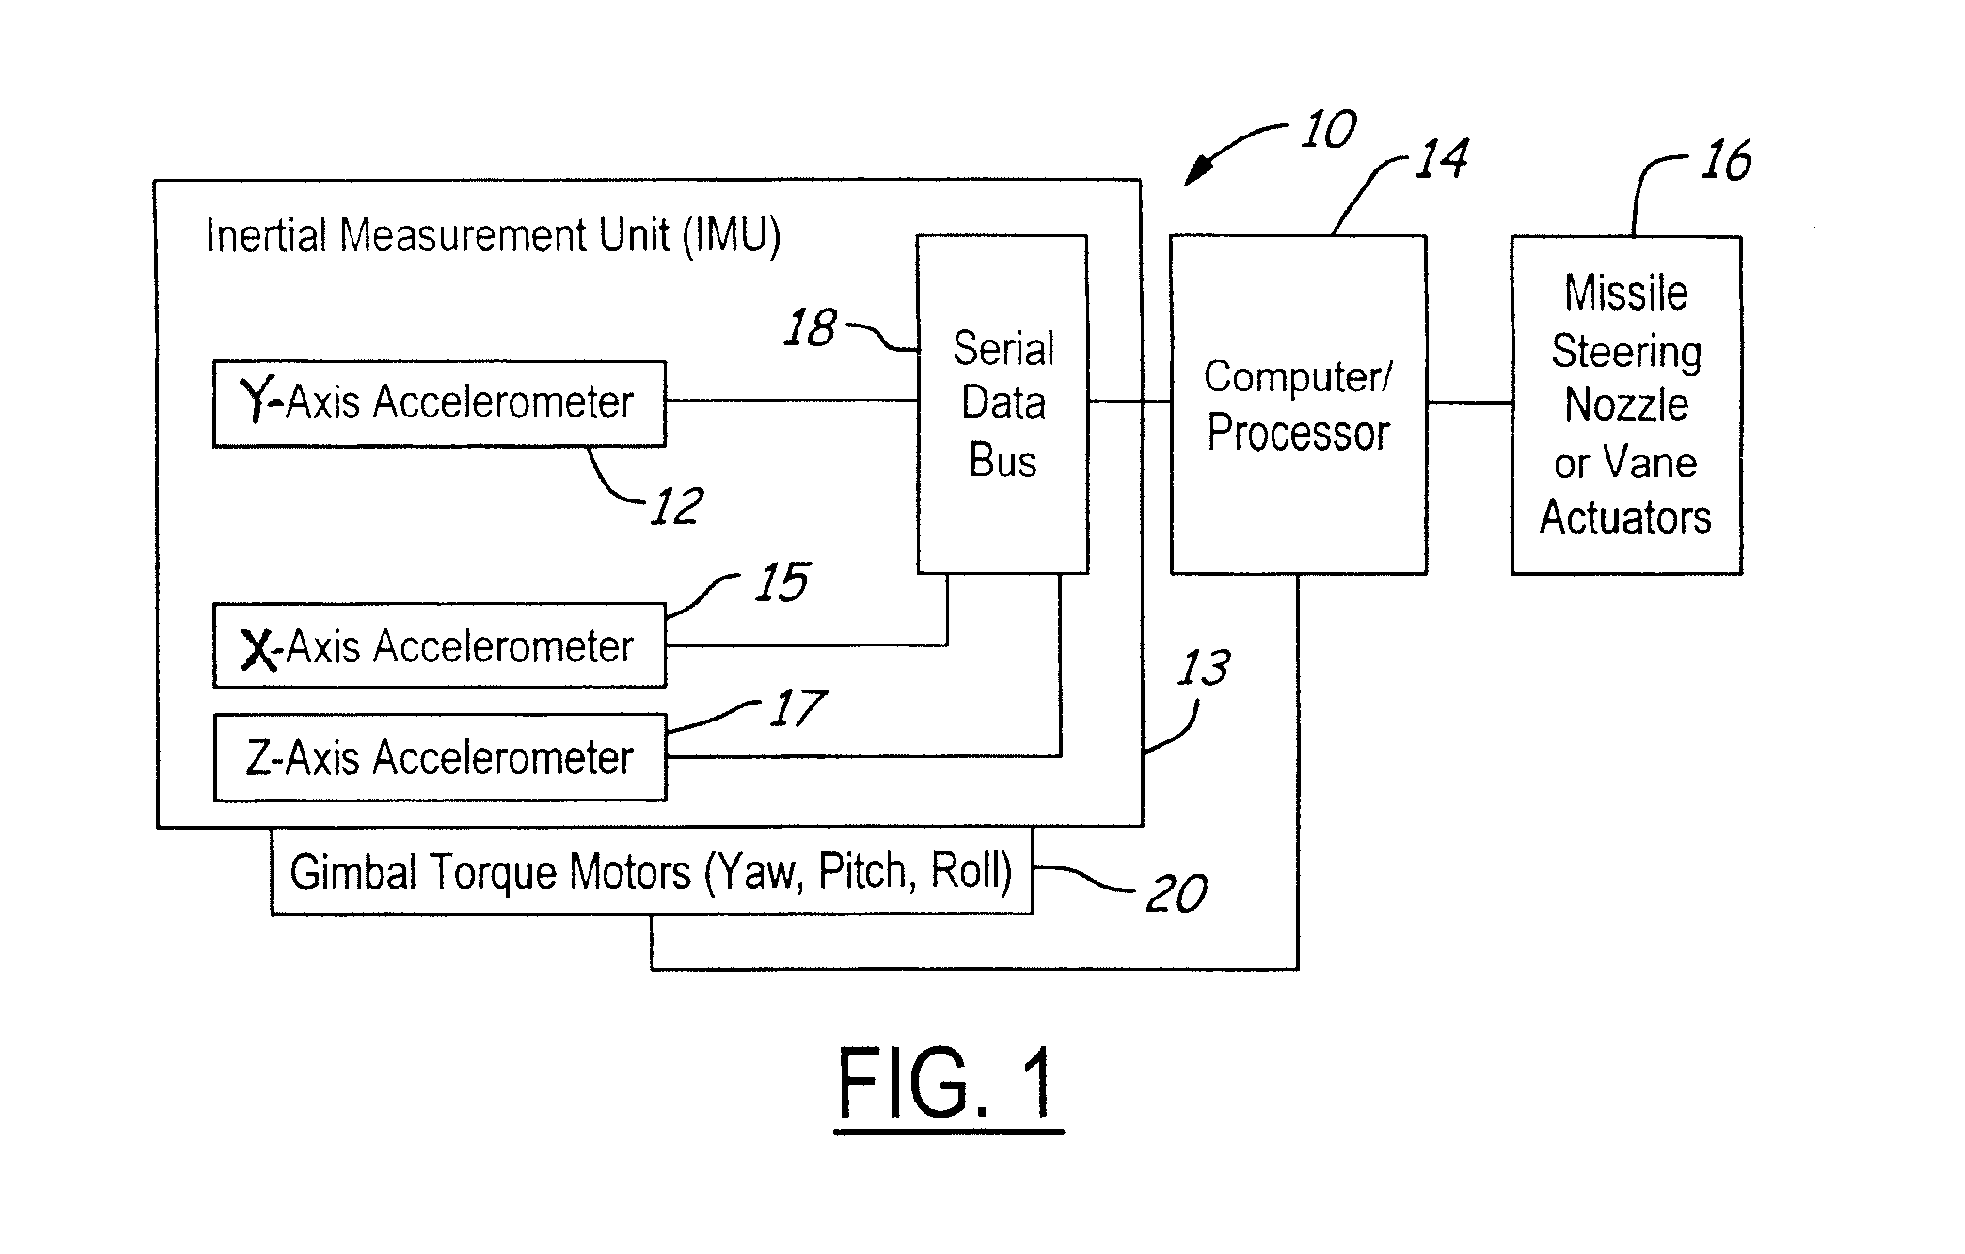 Angular and linear flexure plate accelerometer